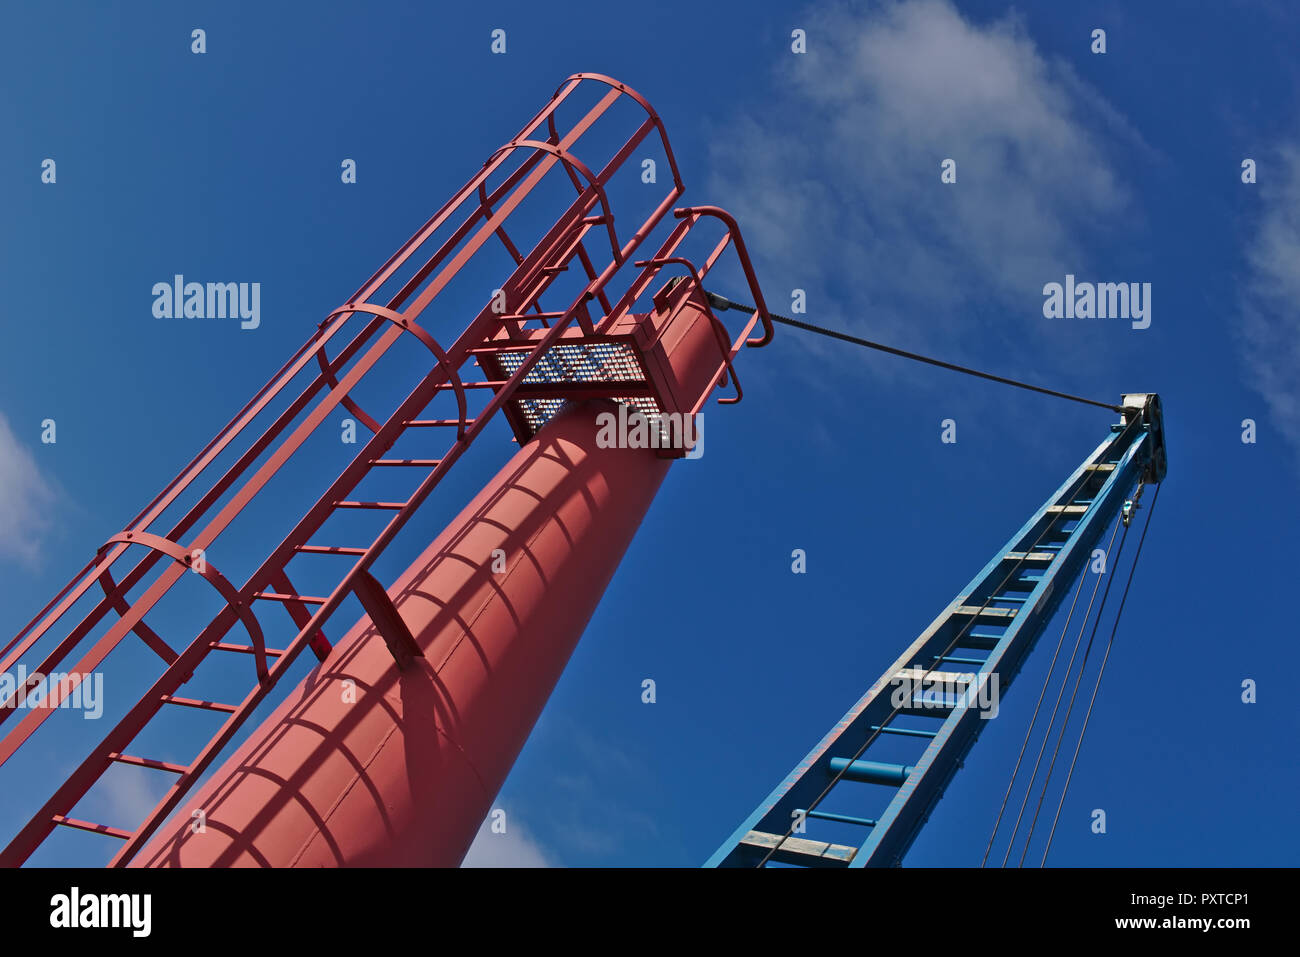 Red and blue boat crane with blue sky Stock Photo